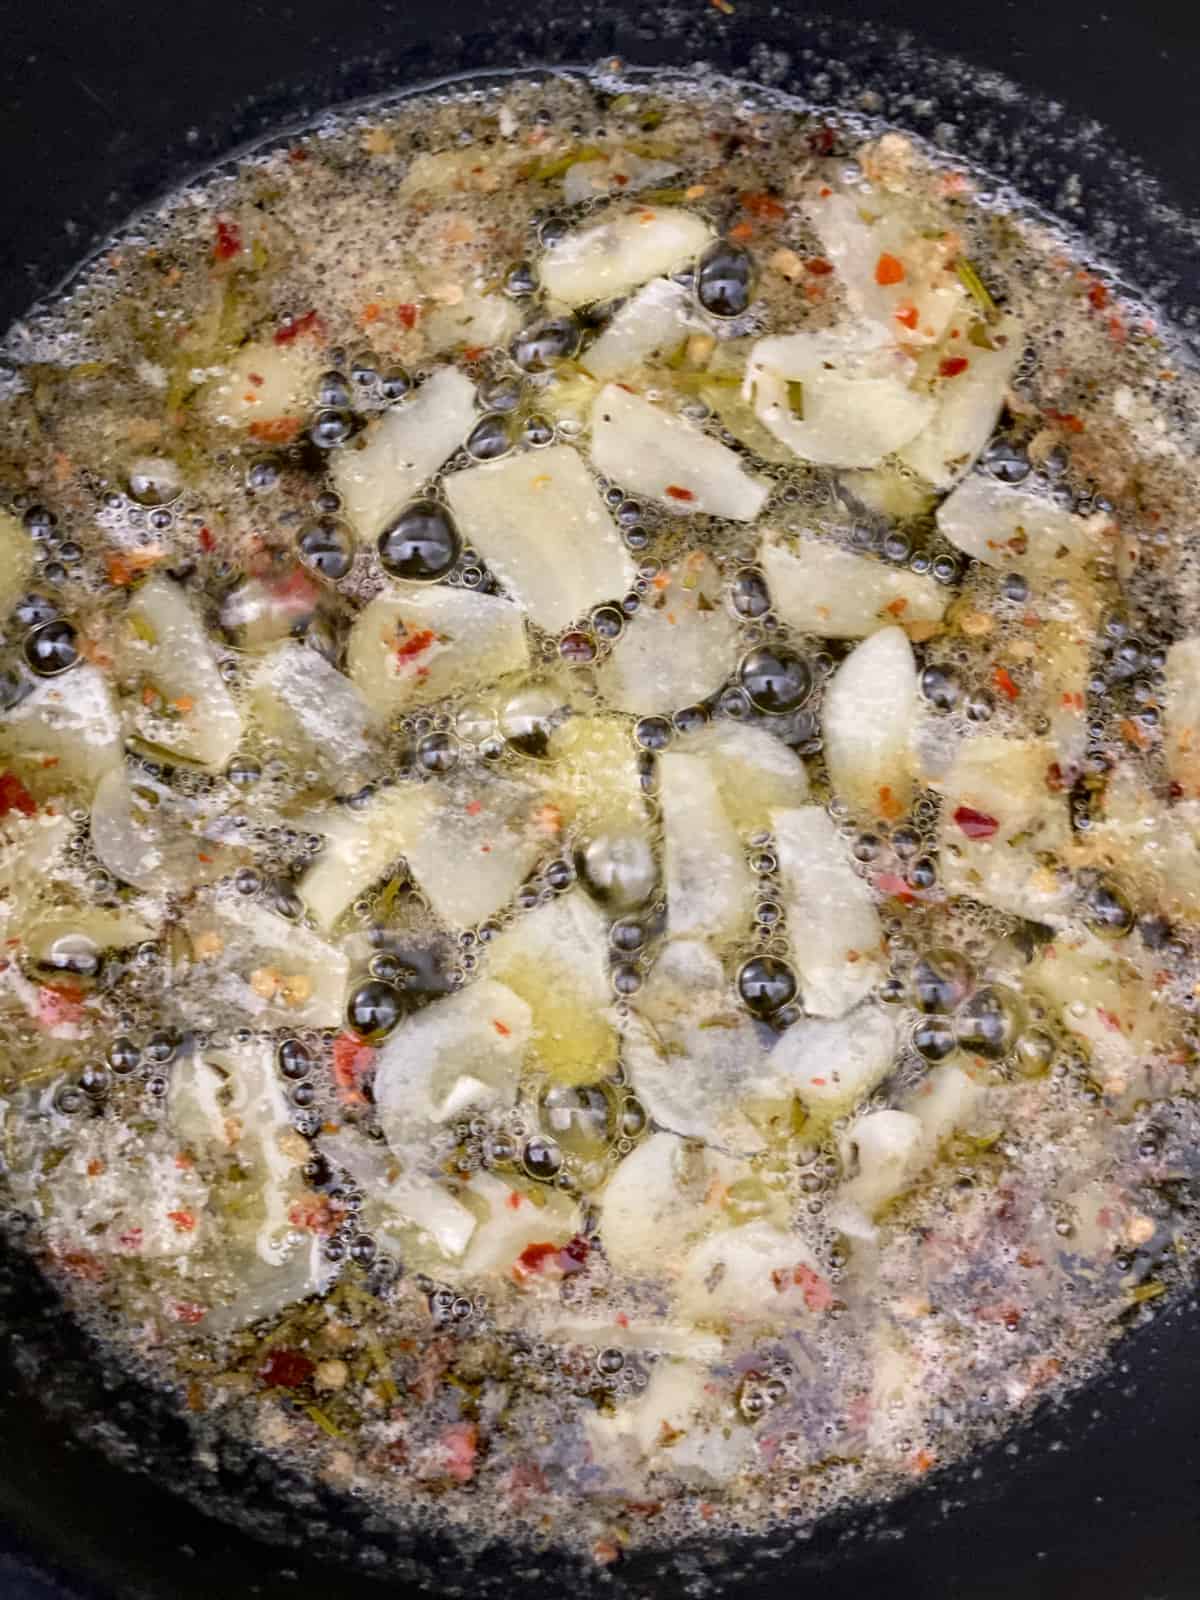 Sliced garlic, minced rosemary and seasonings with oil in a skillet.